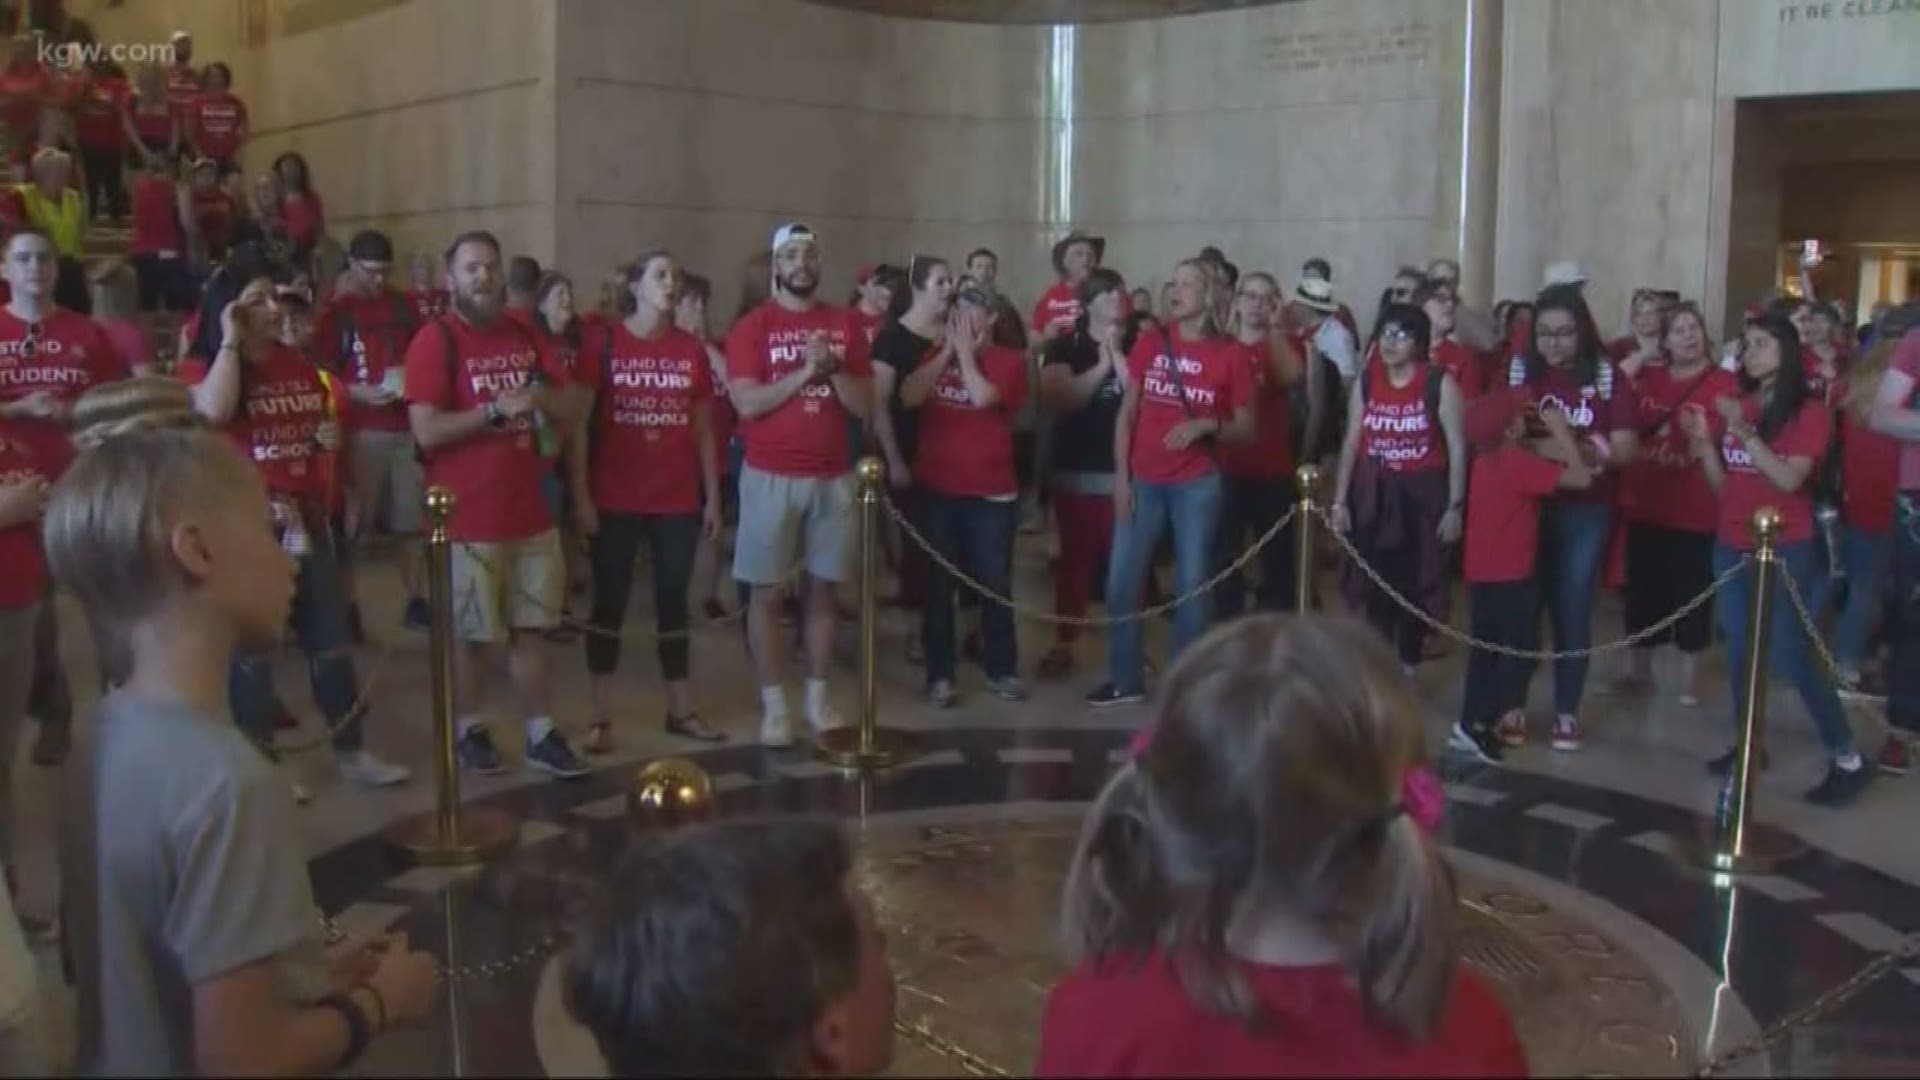 Teachers, students, parents supporters march, rally at State Capitol